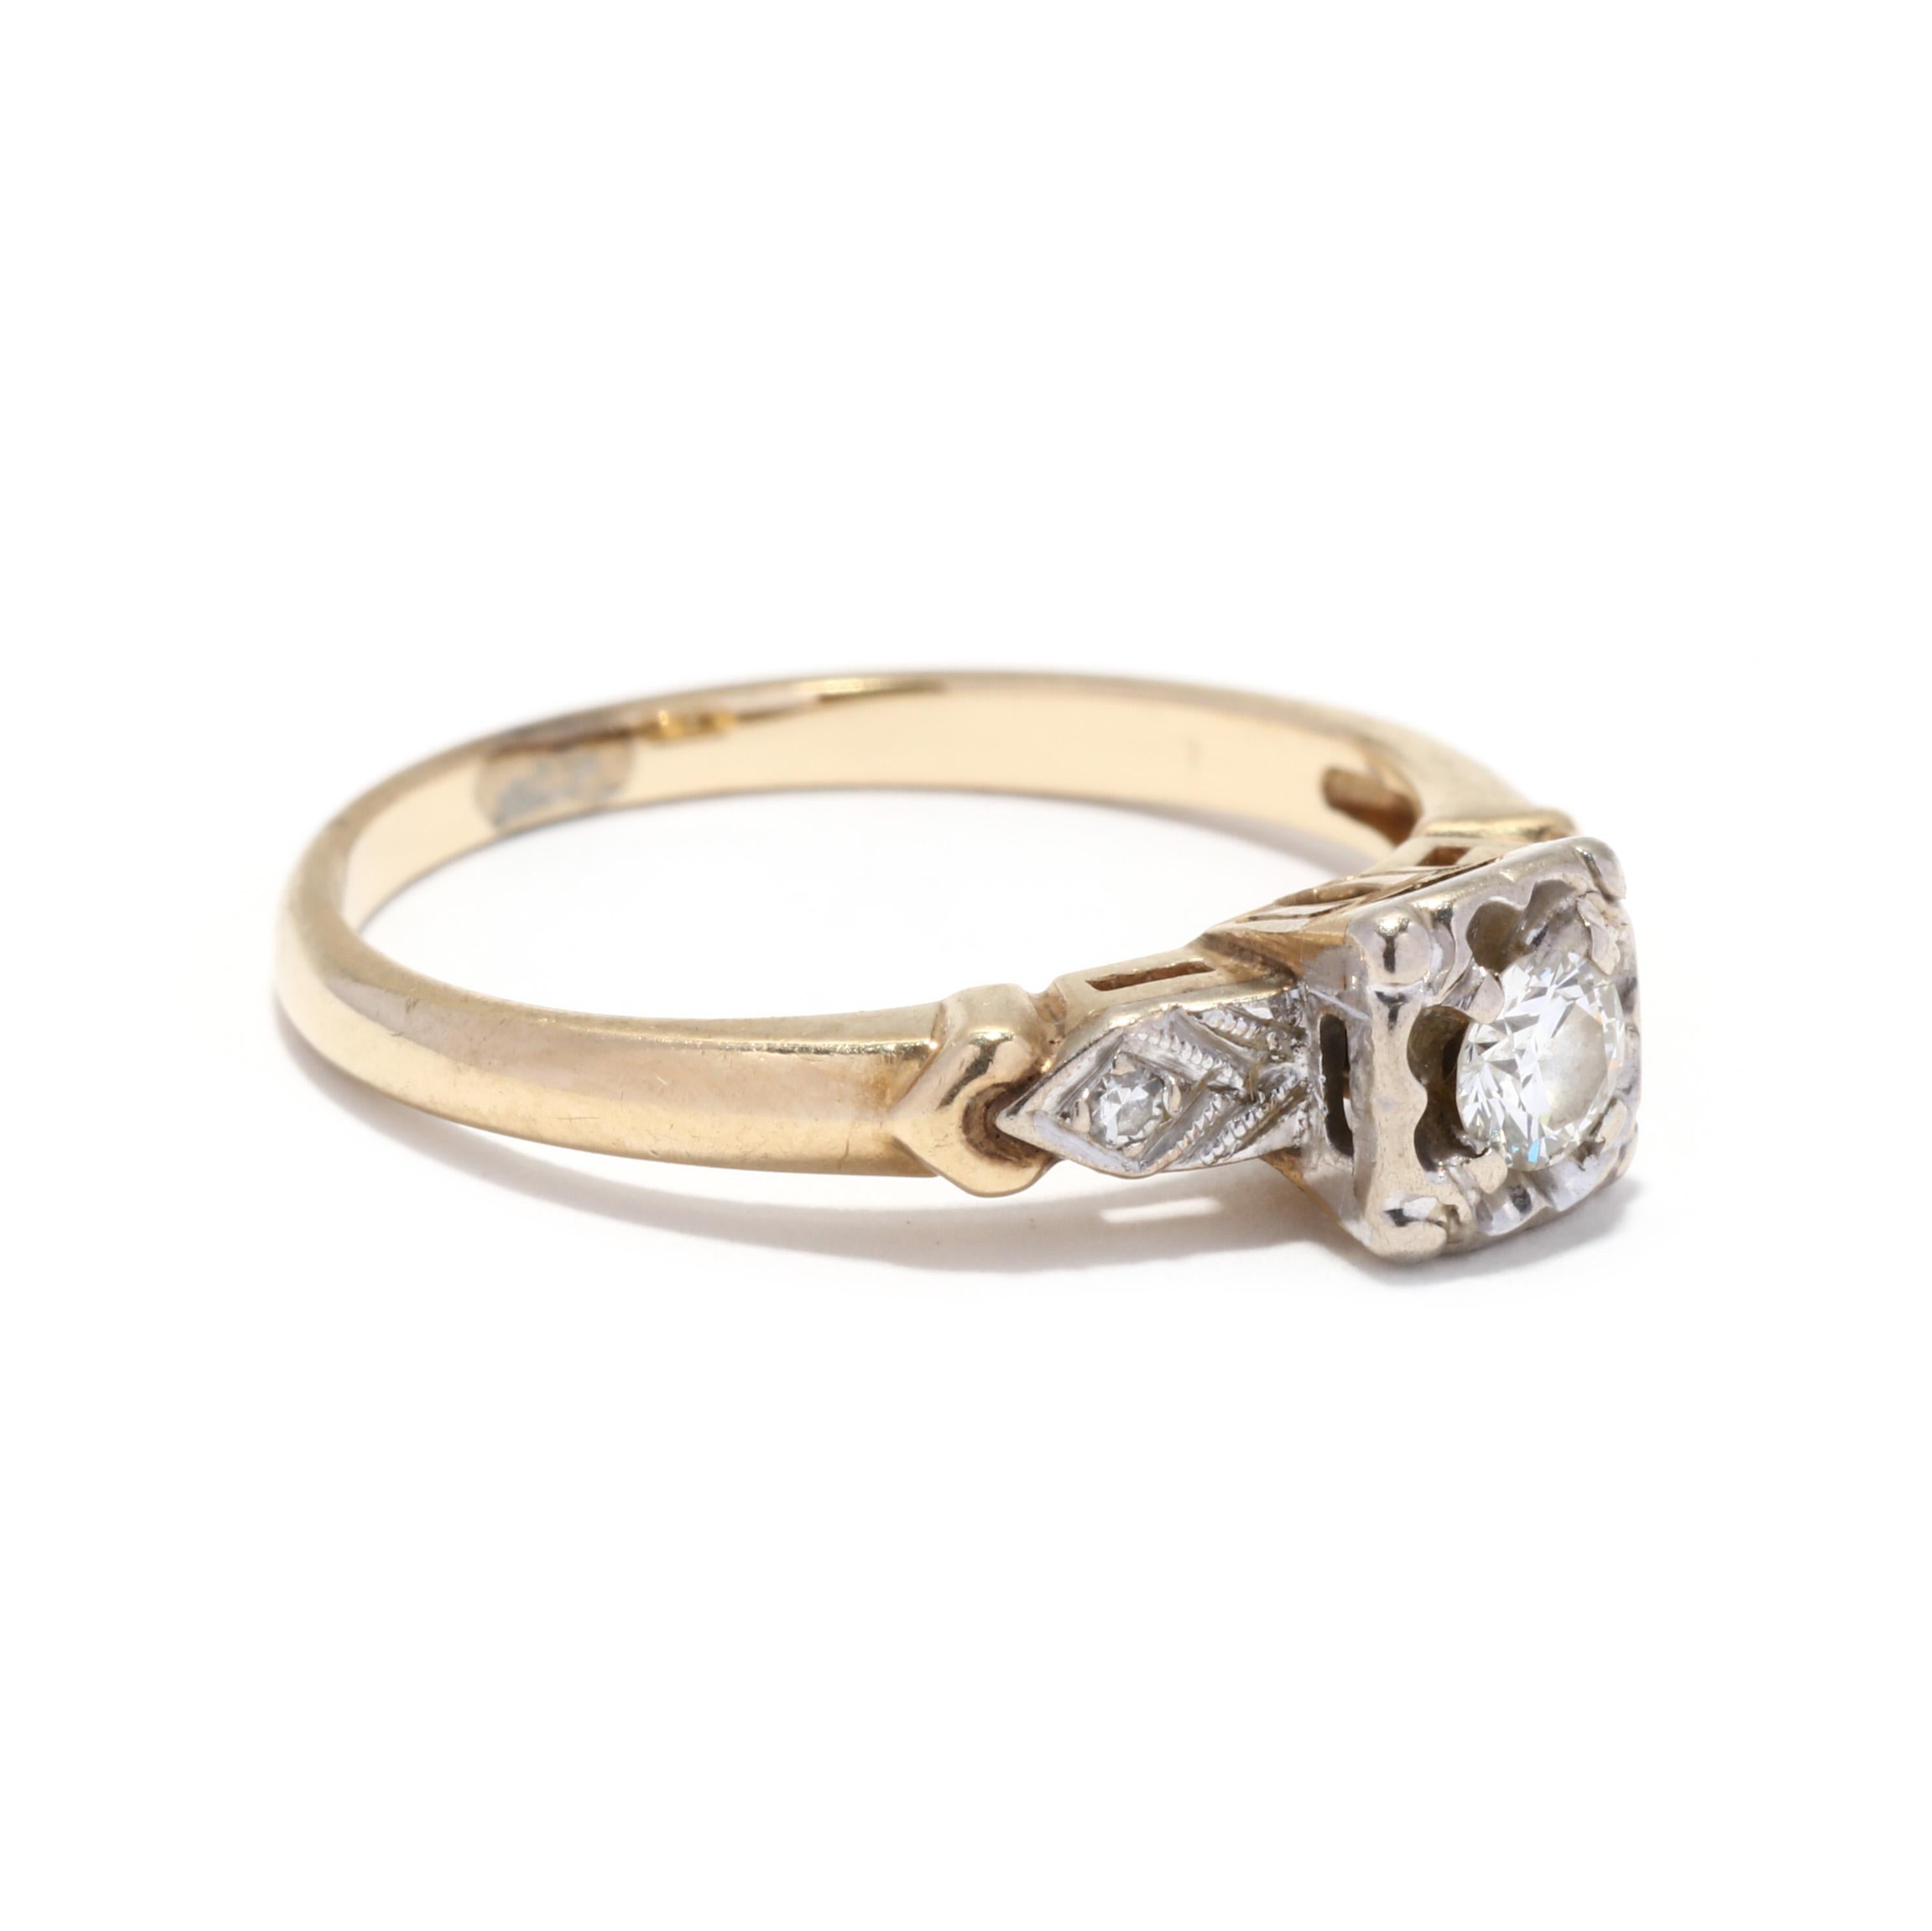 A retro 14 karat yellow and white gold diamond engagement ring. This stackable ring features a full cut round diamond center stone weighing approximately .14 carat set in a square mounting, with geometric, milgrain shoulders set with single cut